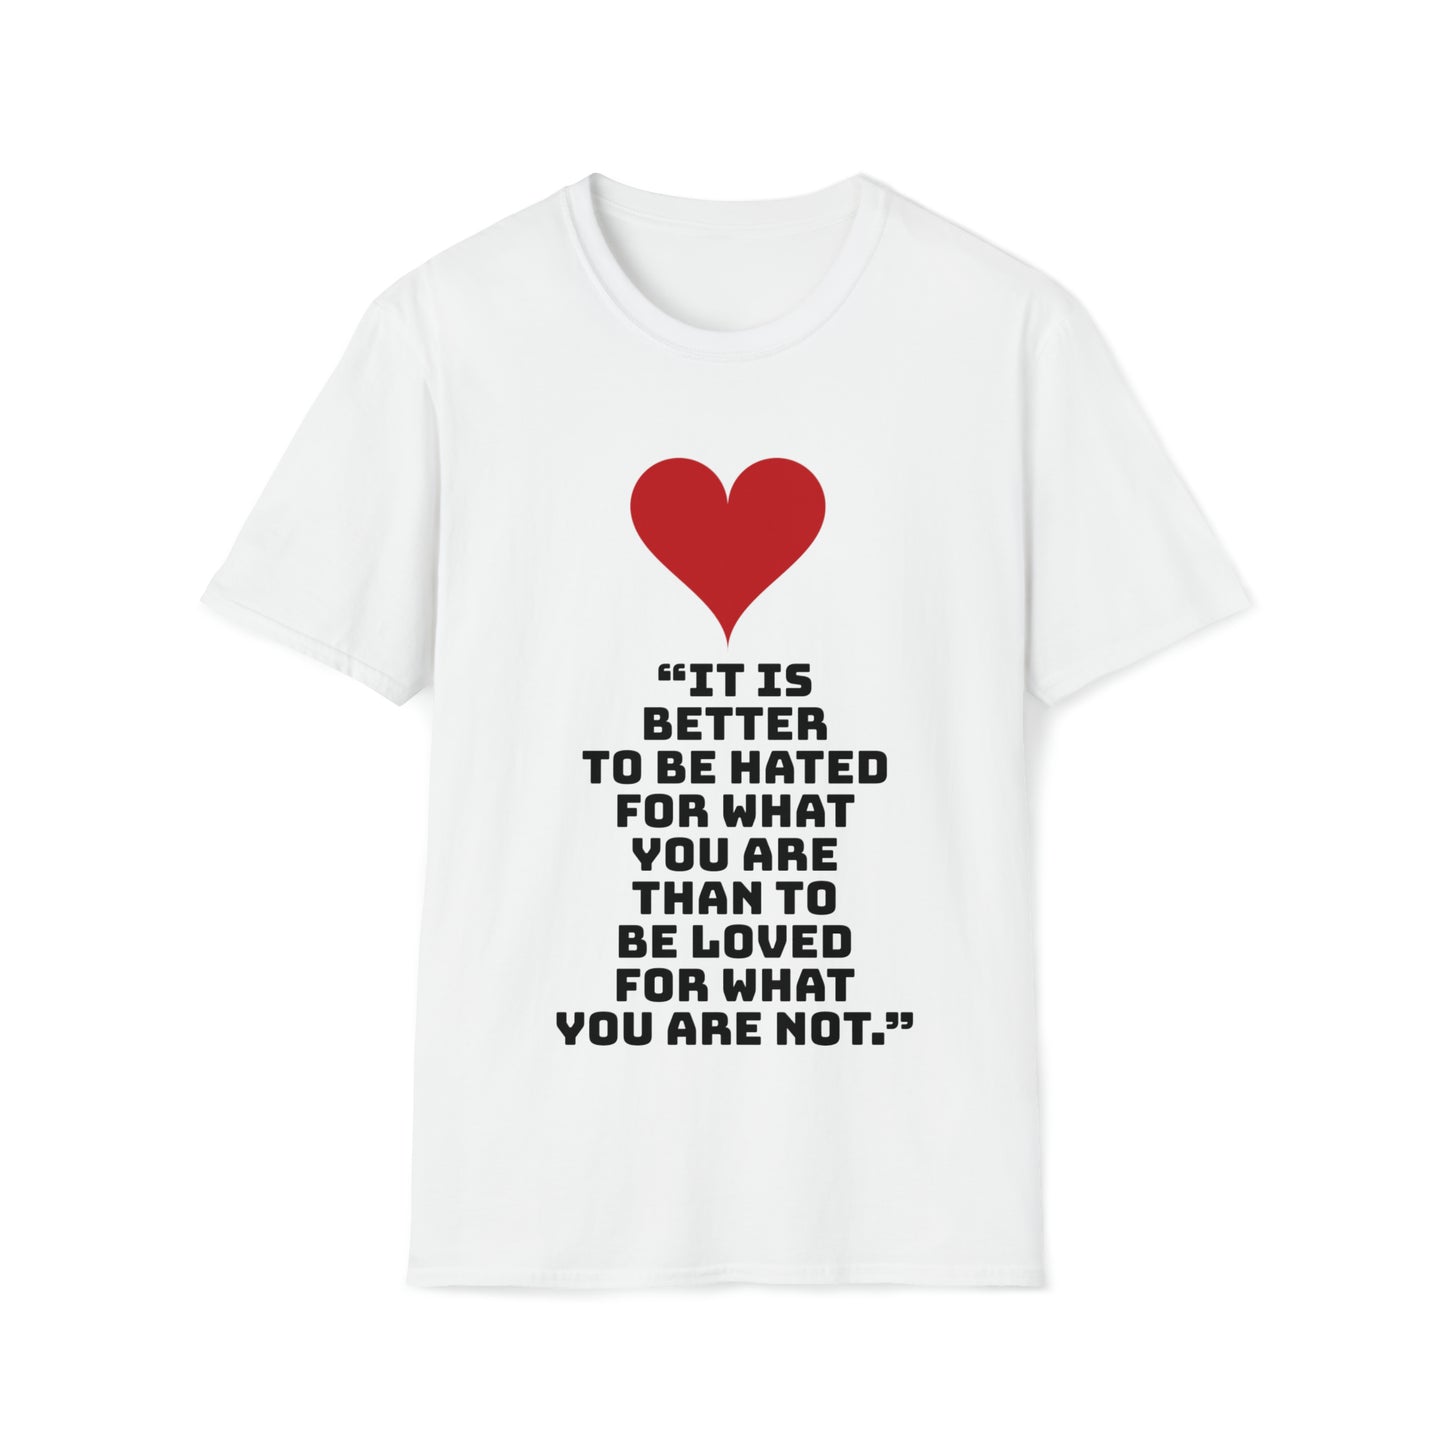 Hated or Loved tshirt